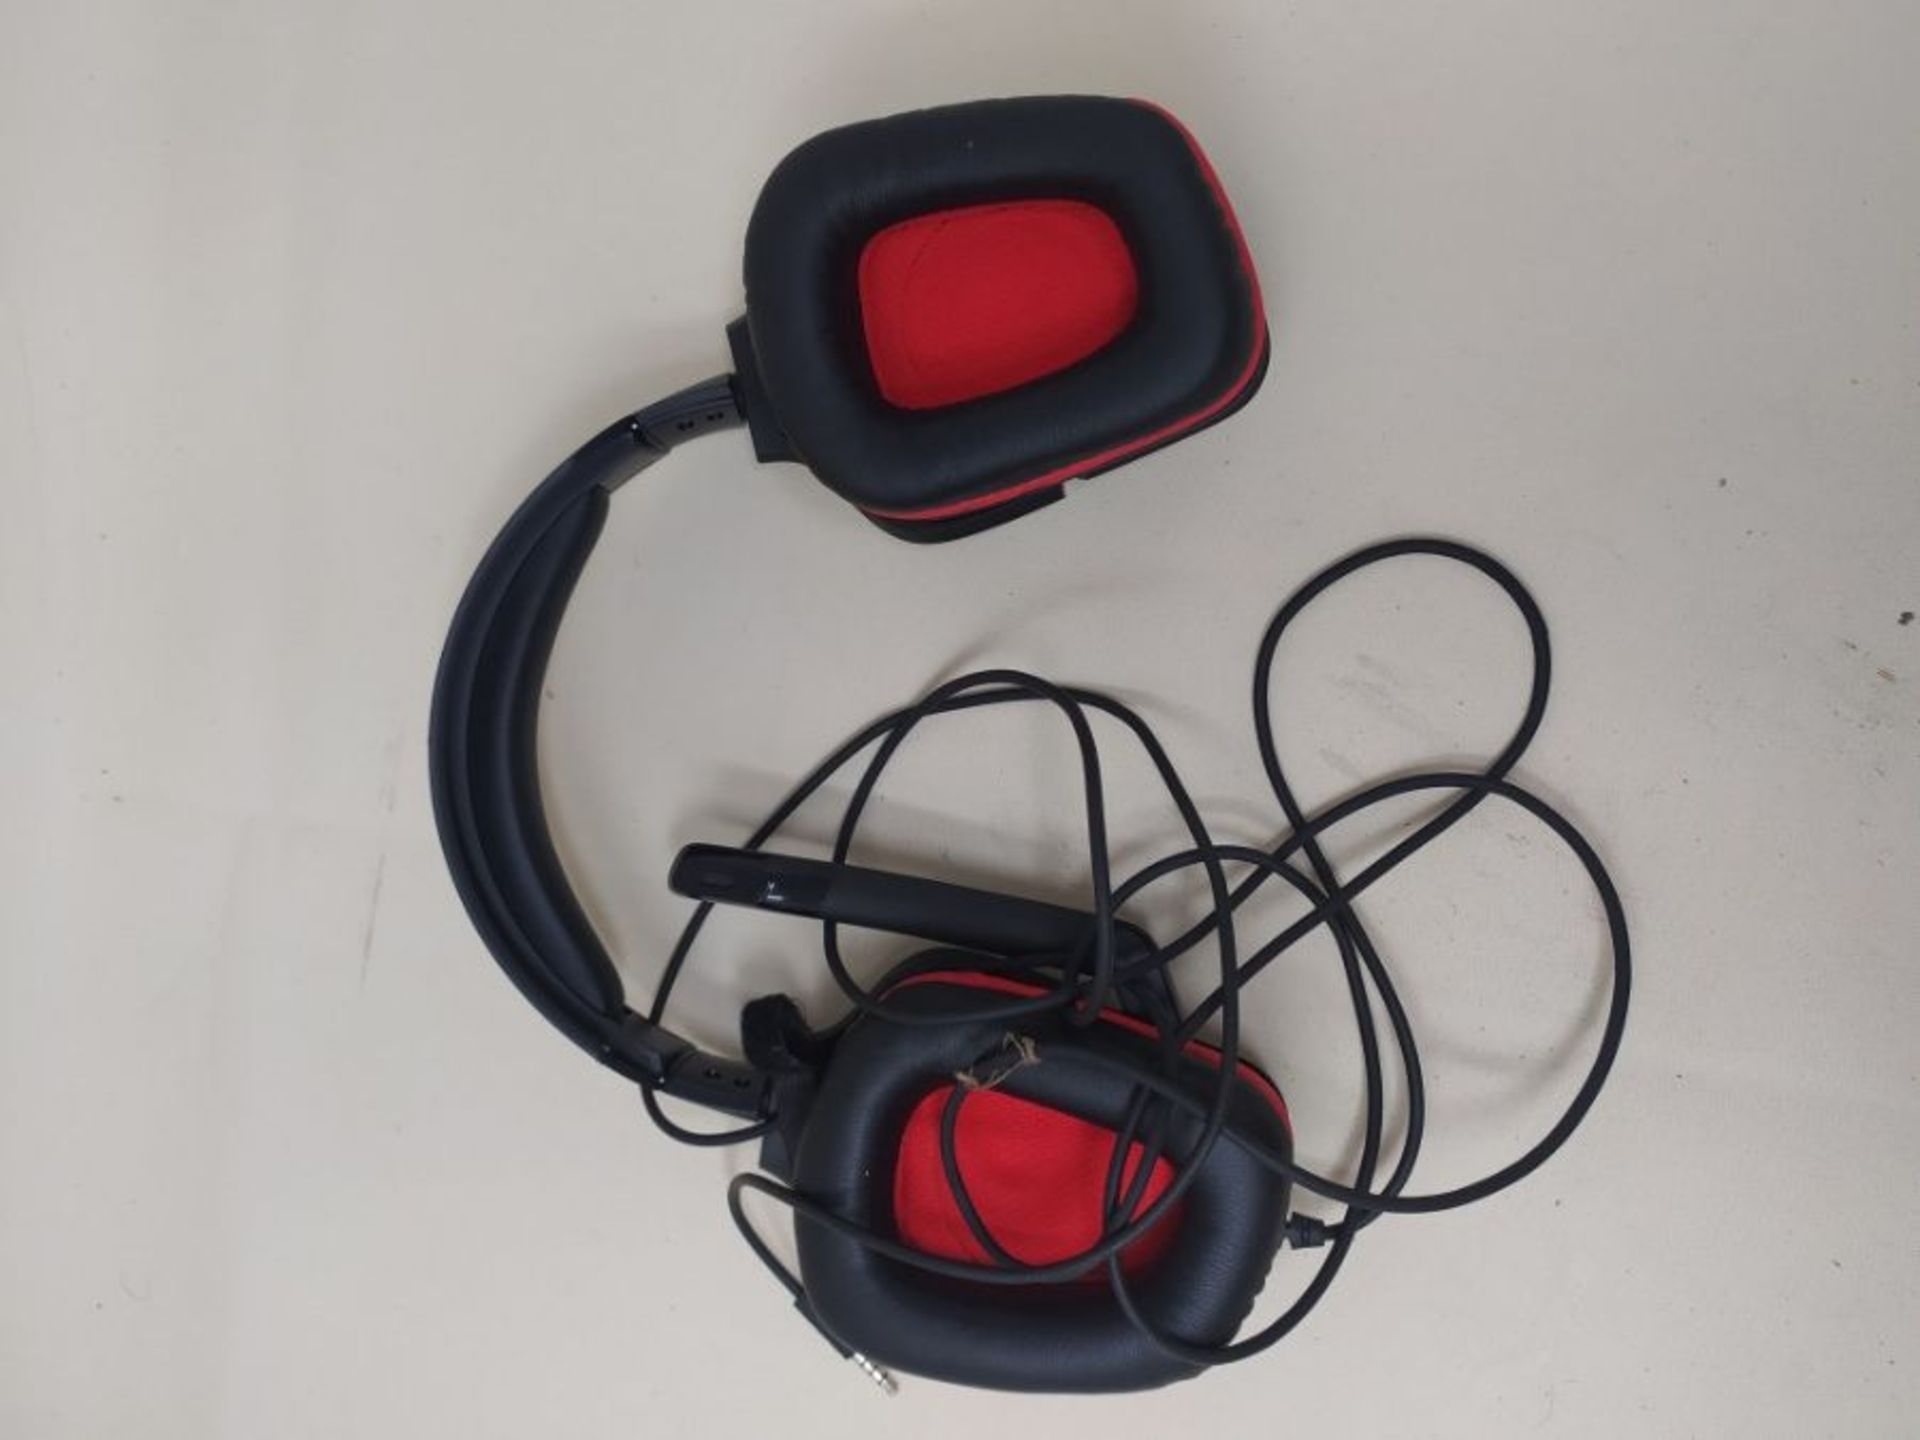 Logitech G332 Wired Gaming Headset, 50 mm Audio Drivers, Rotating Leatherette Ear Cups - Image 3 of 3